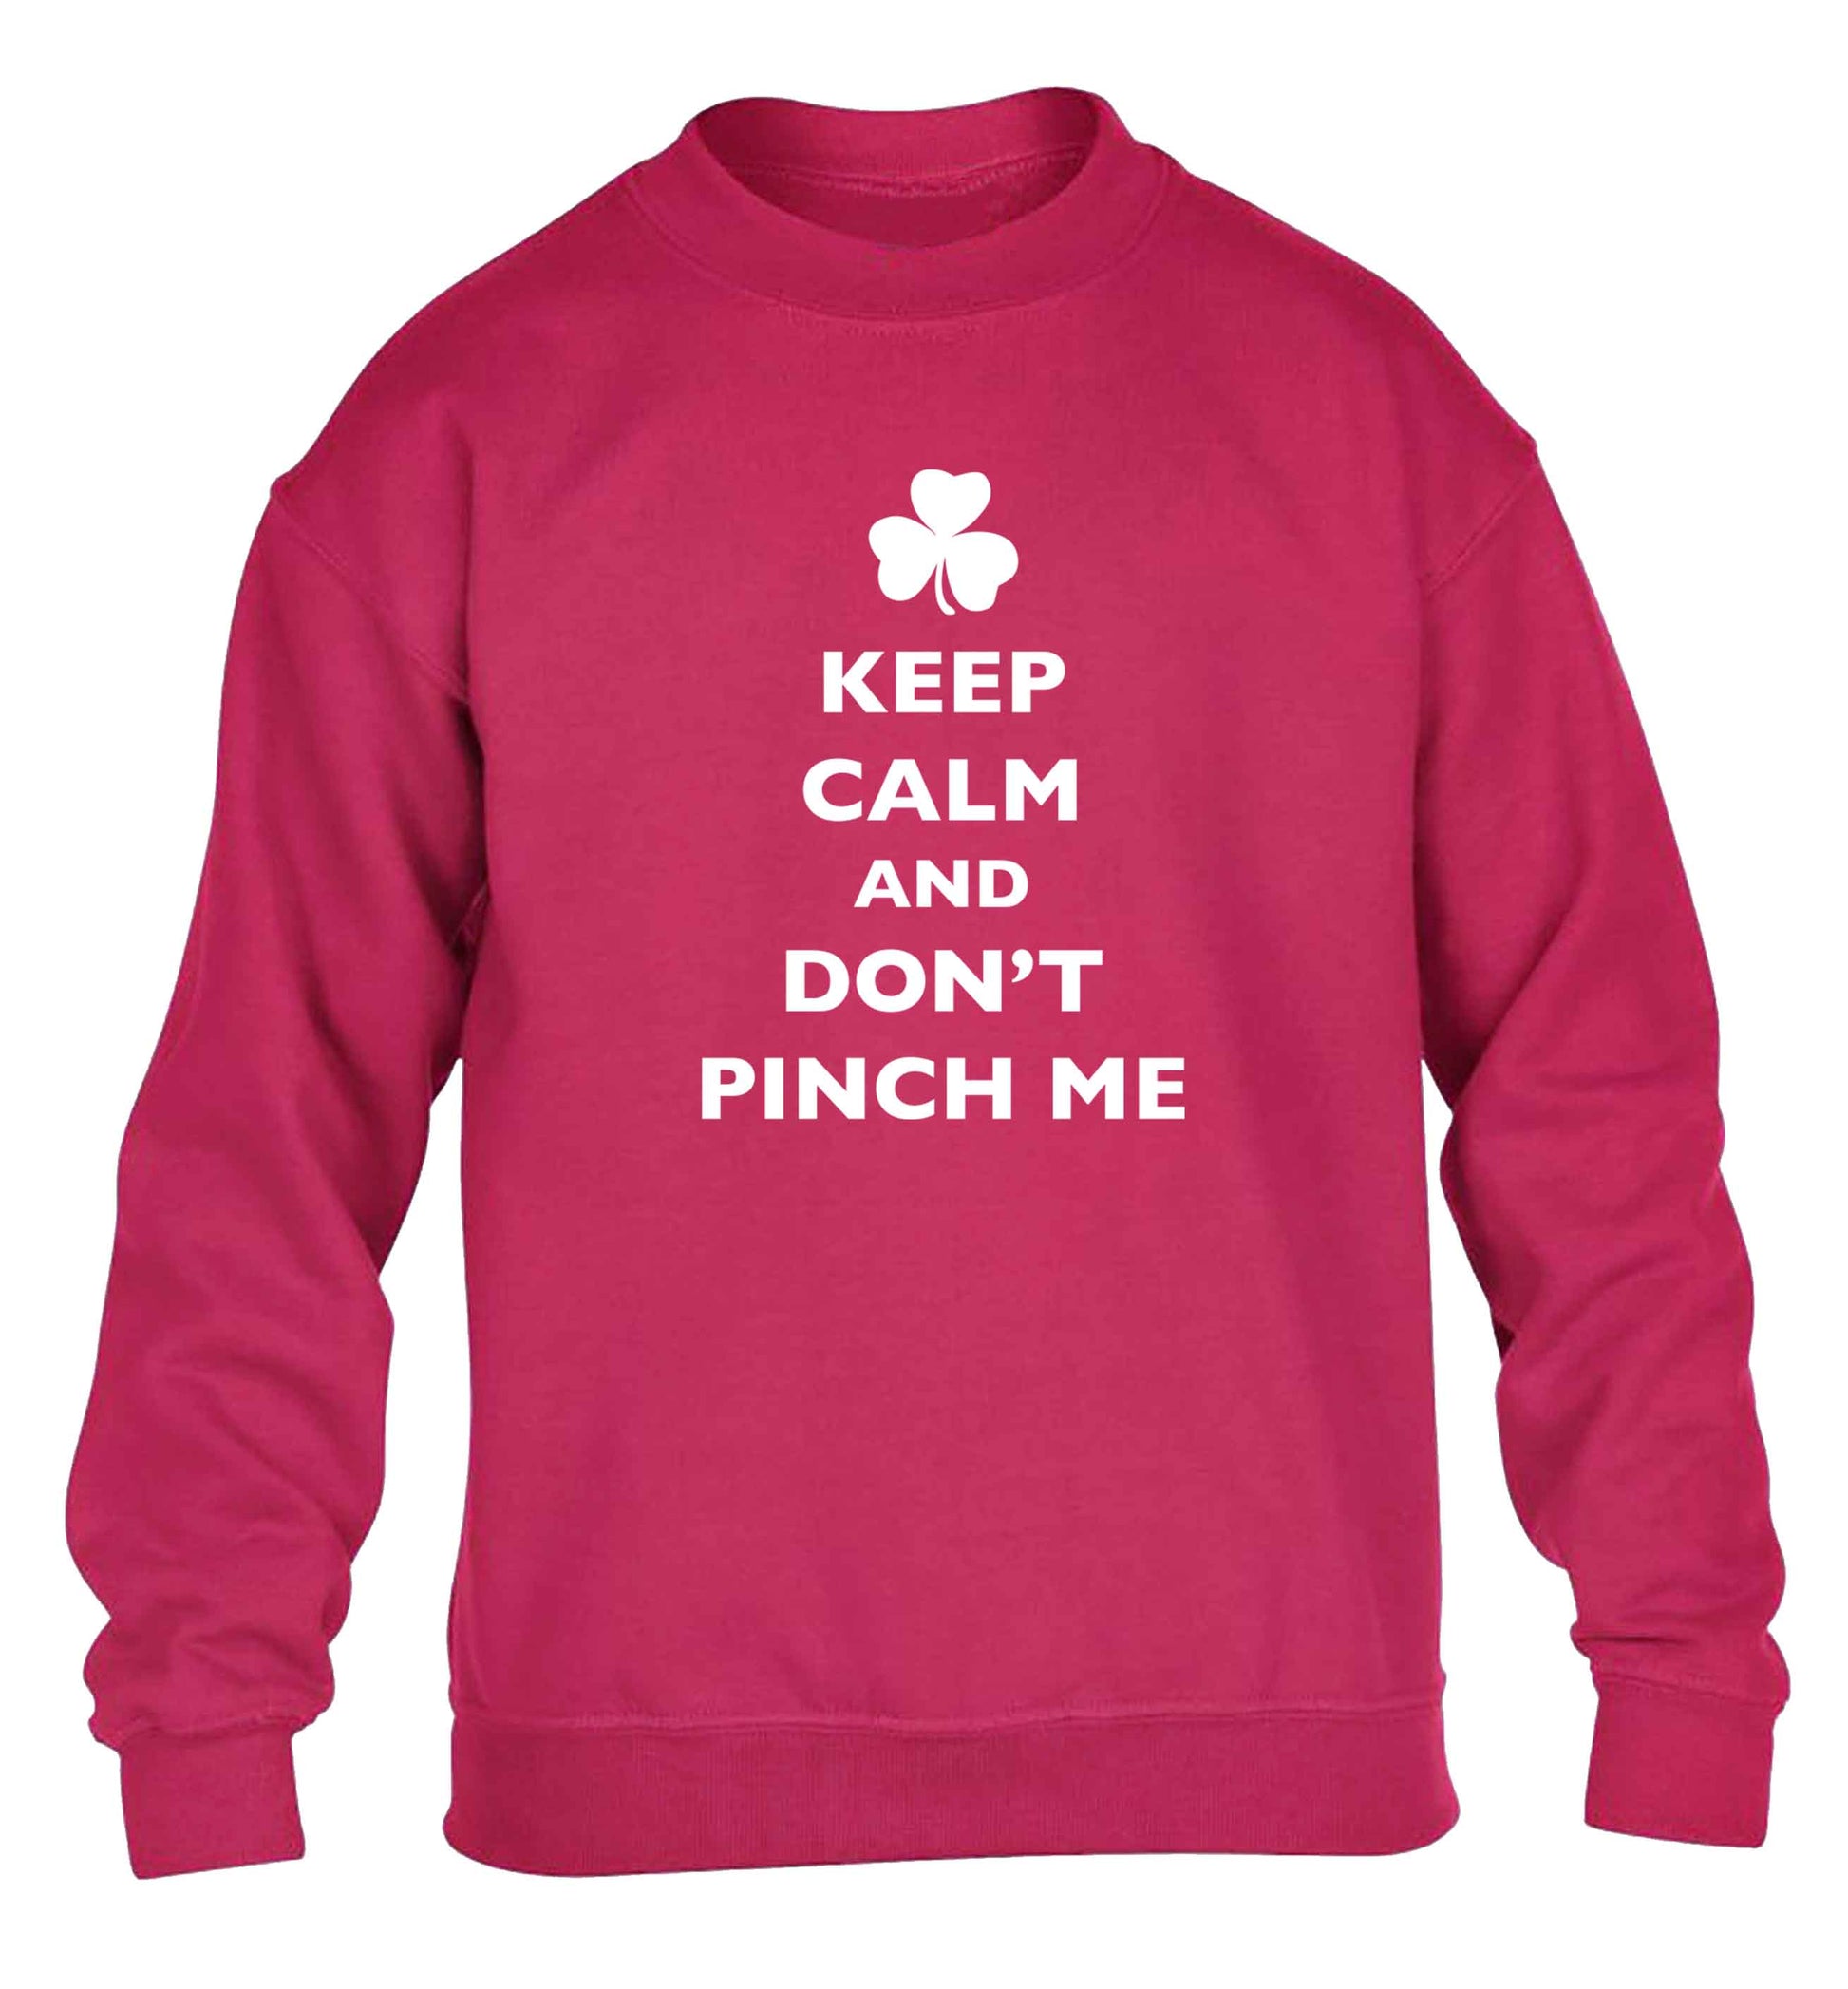 Keep calm and don't pinch me children's pink sweater 12-13 Years